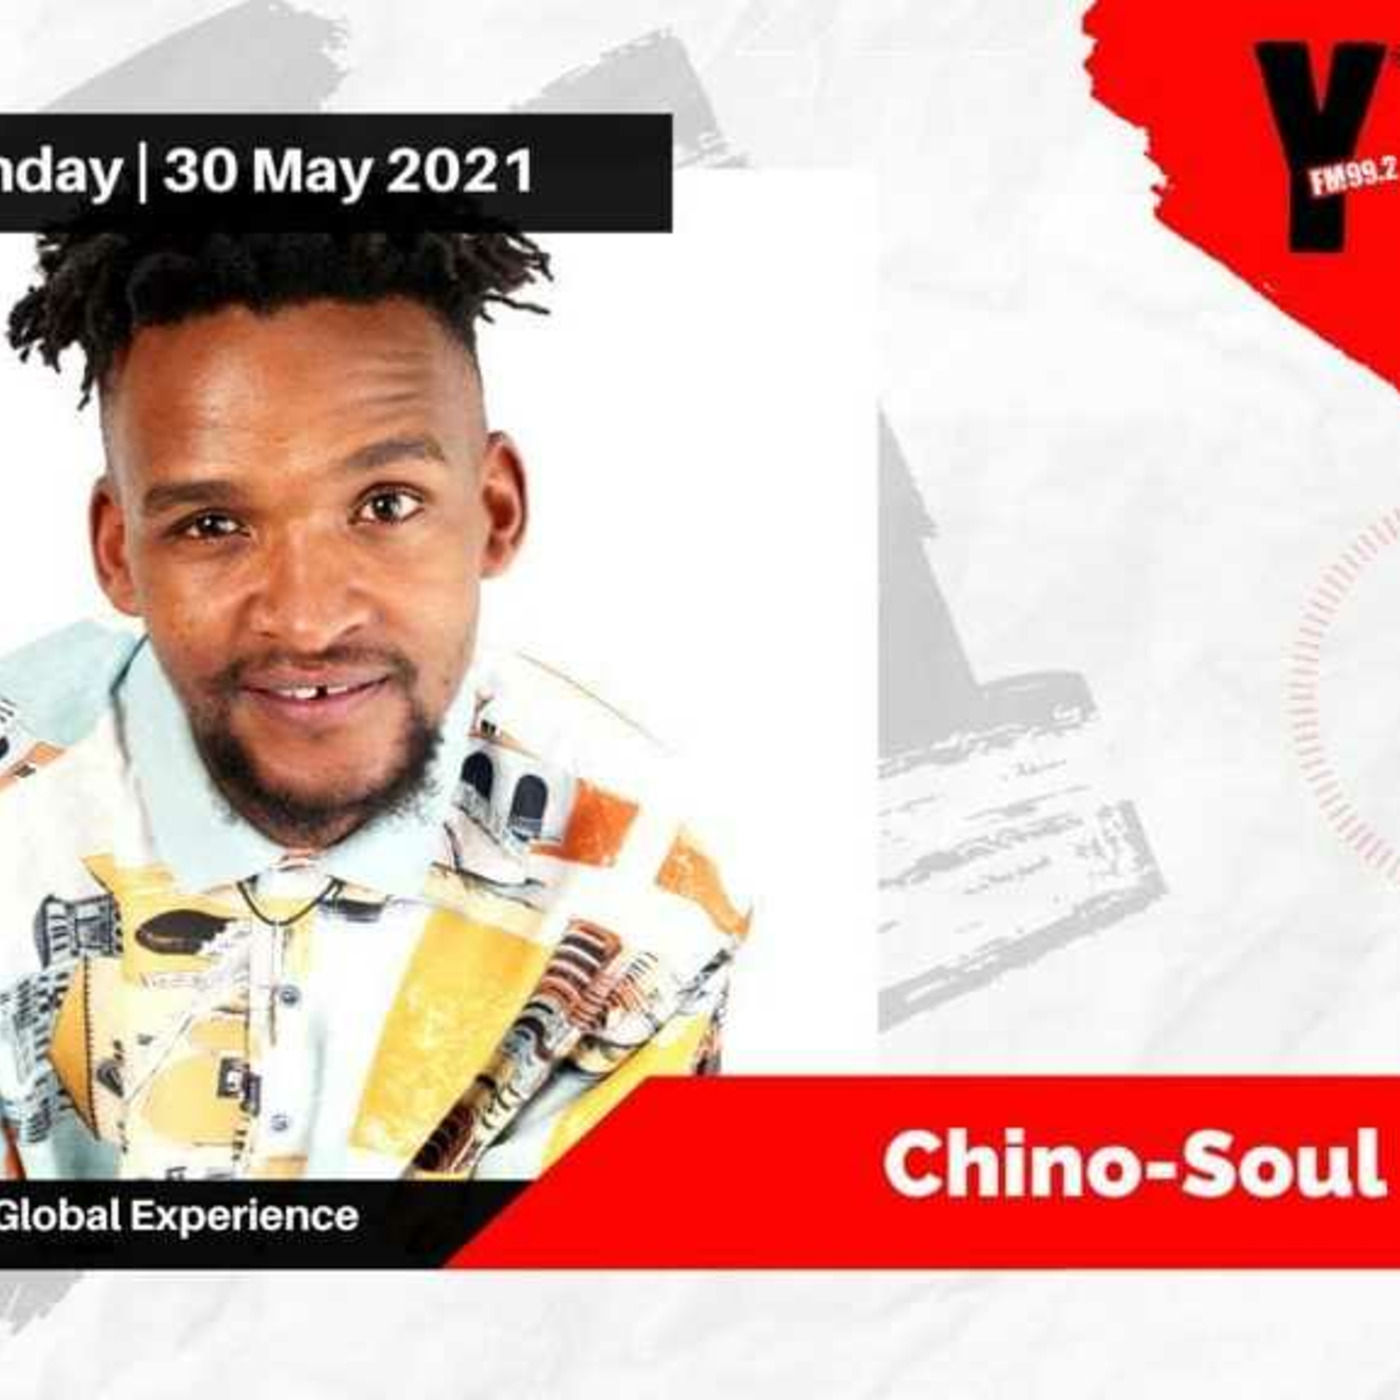 Chino-Soul on YFM's The Global Experience Show